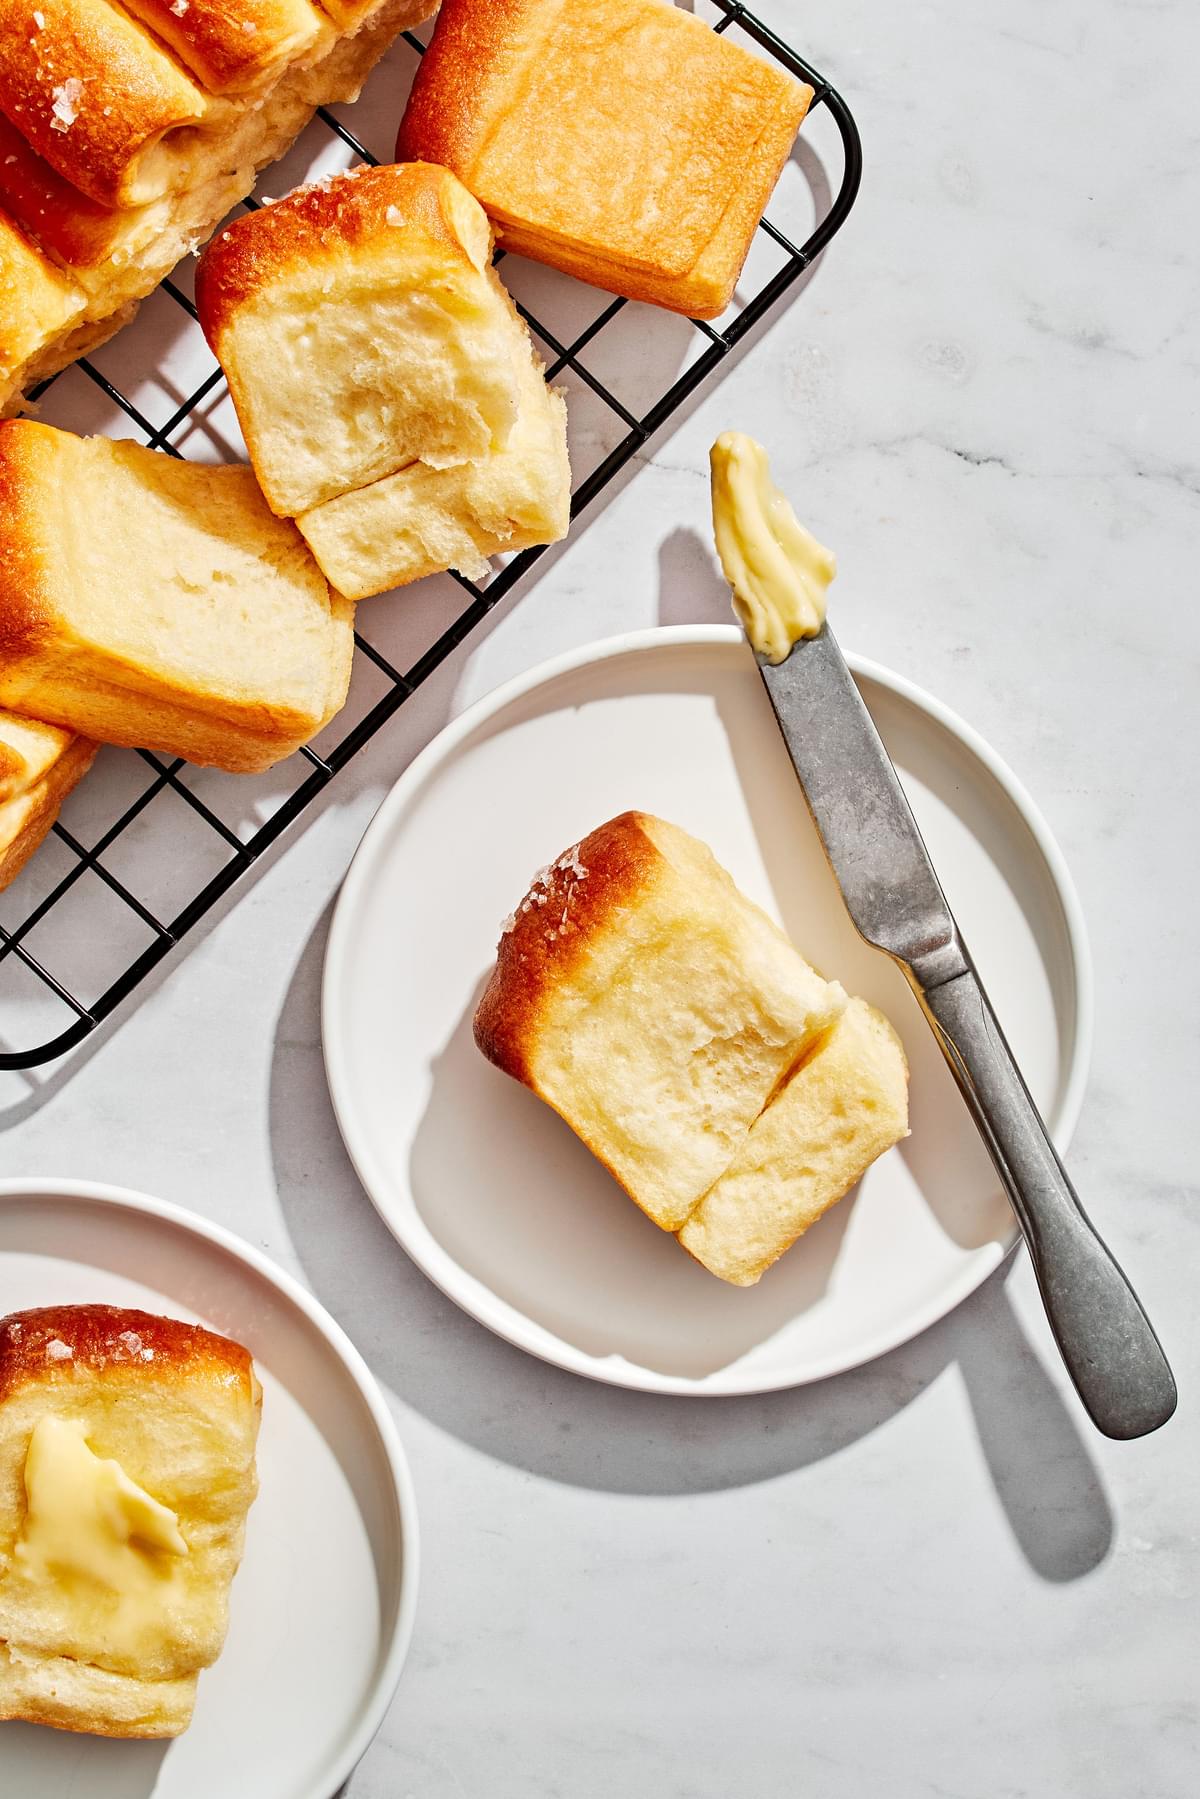 homemade parker house rolls on a plate next to a knife with butter